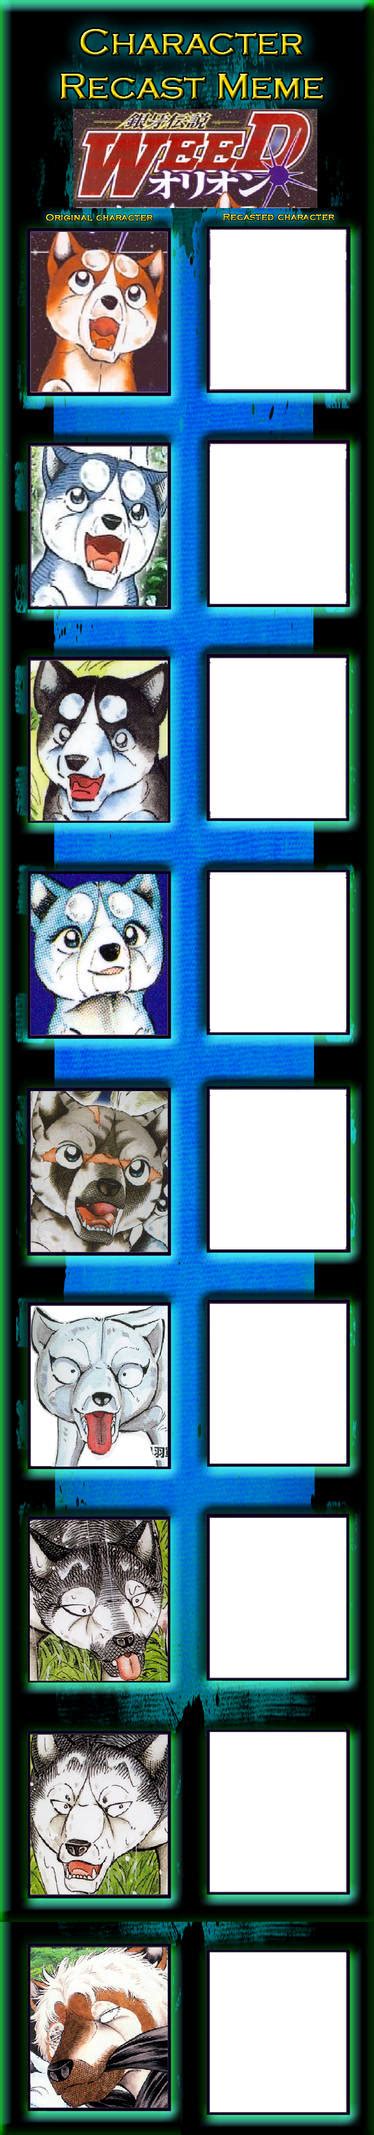 Your Ginga Densetsu Weed Orion Cast Meme By Codxros3 On Deviantart